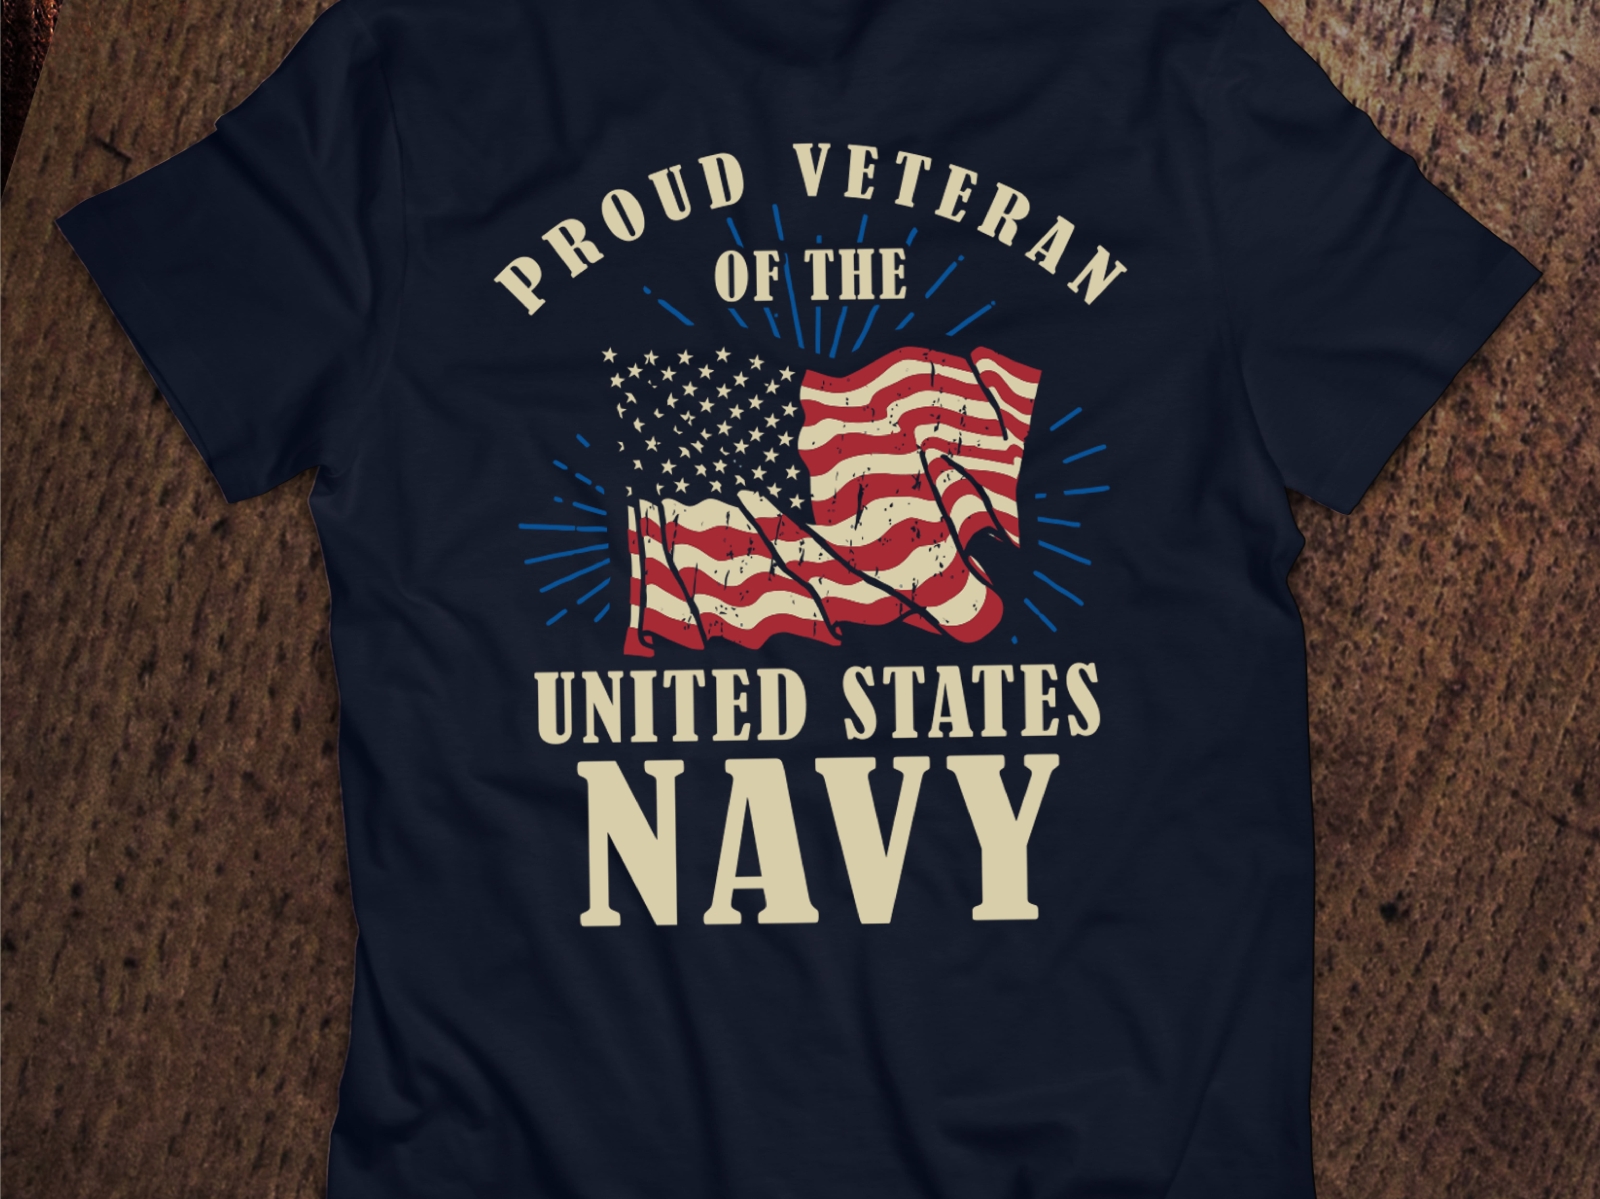 Download Proud Veteran Of The United States NAVY by Zubair Ahmed on ...